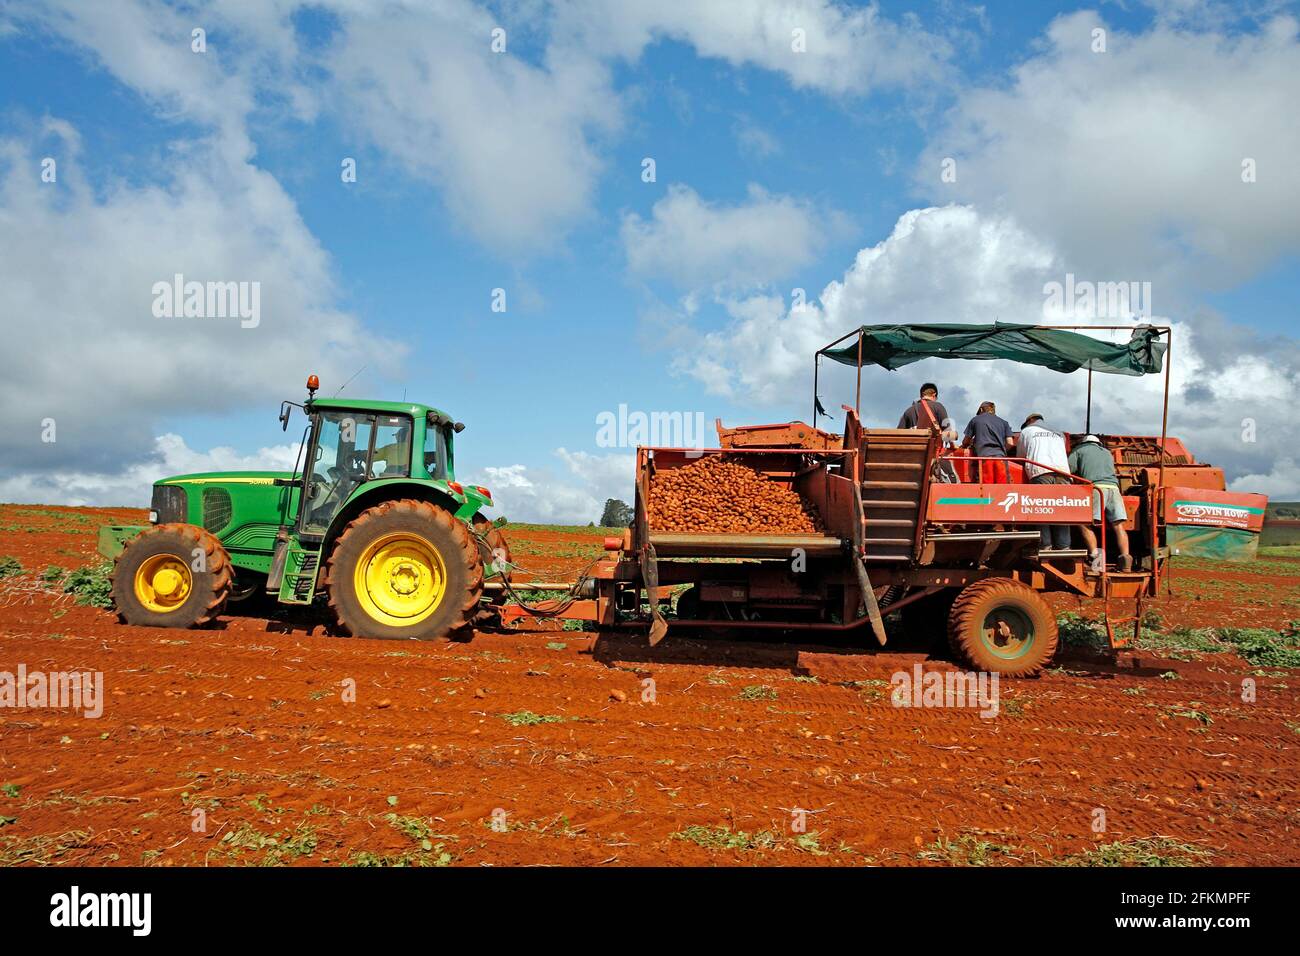 Harvesting potatoes using a John Deere 6620 tractor and Kverneland UN5300 potato harvester. There are four farm workers standing on the machine Stock Photo